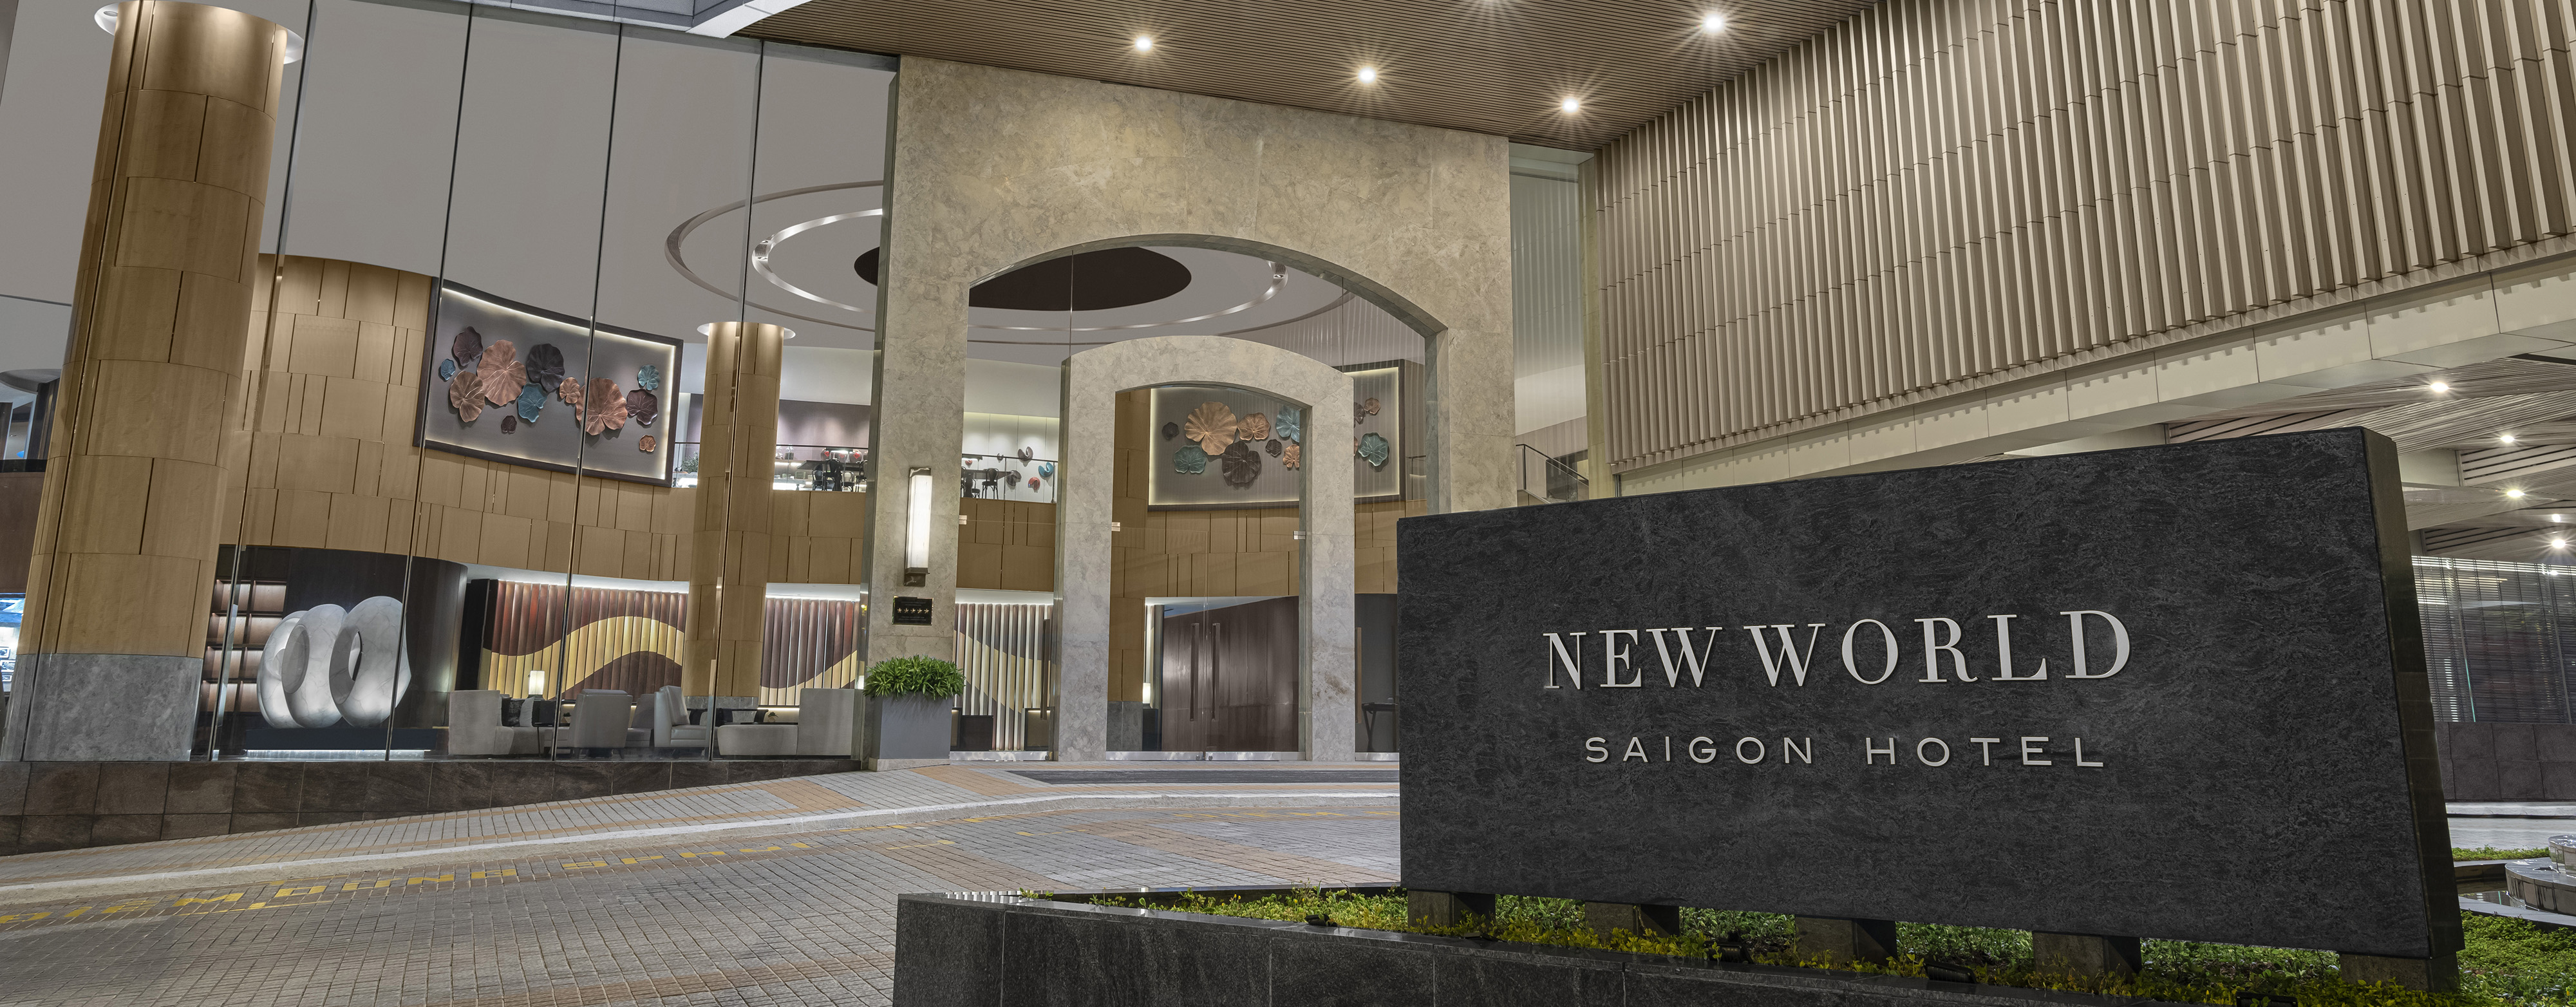 the exterior signage for the New World Saigon Hotel in Ho Chi Minh City in front of the driveway to the hotel entrance